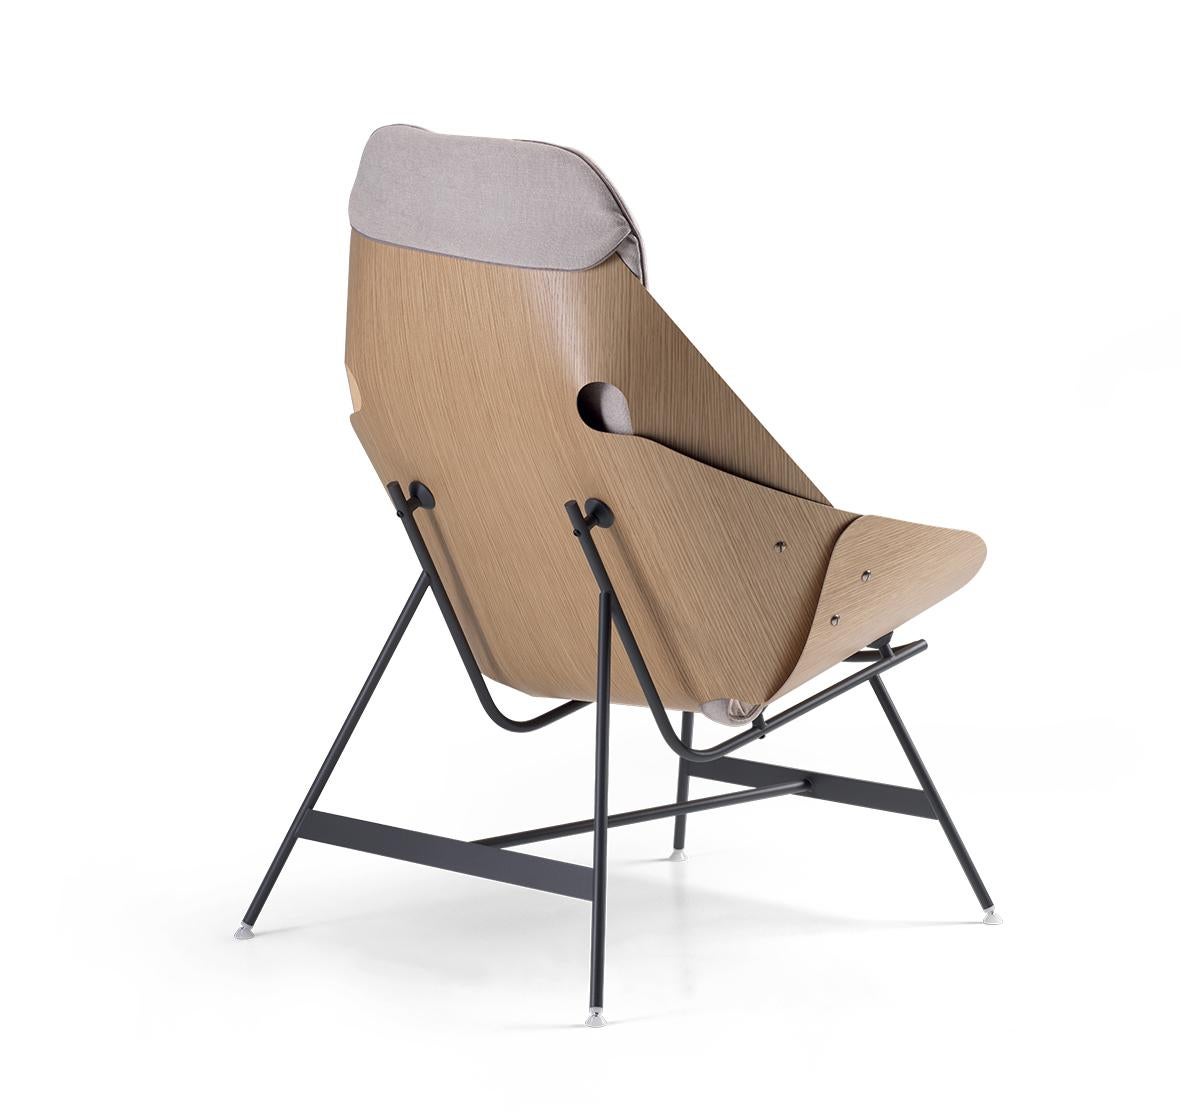 Alias Time Pad Armchair with Upholstery in Natural Oak and Steel Lacquered Frame by Alfredo Häberli

Cushion for time armchair.Cushion with quilted cover in fabric or leather.

Born in Buenos Aires in 1964, he moved to Zurich in 1977, where in